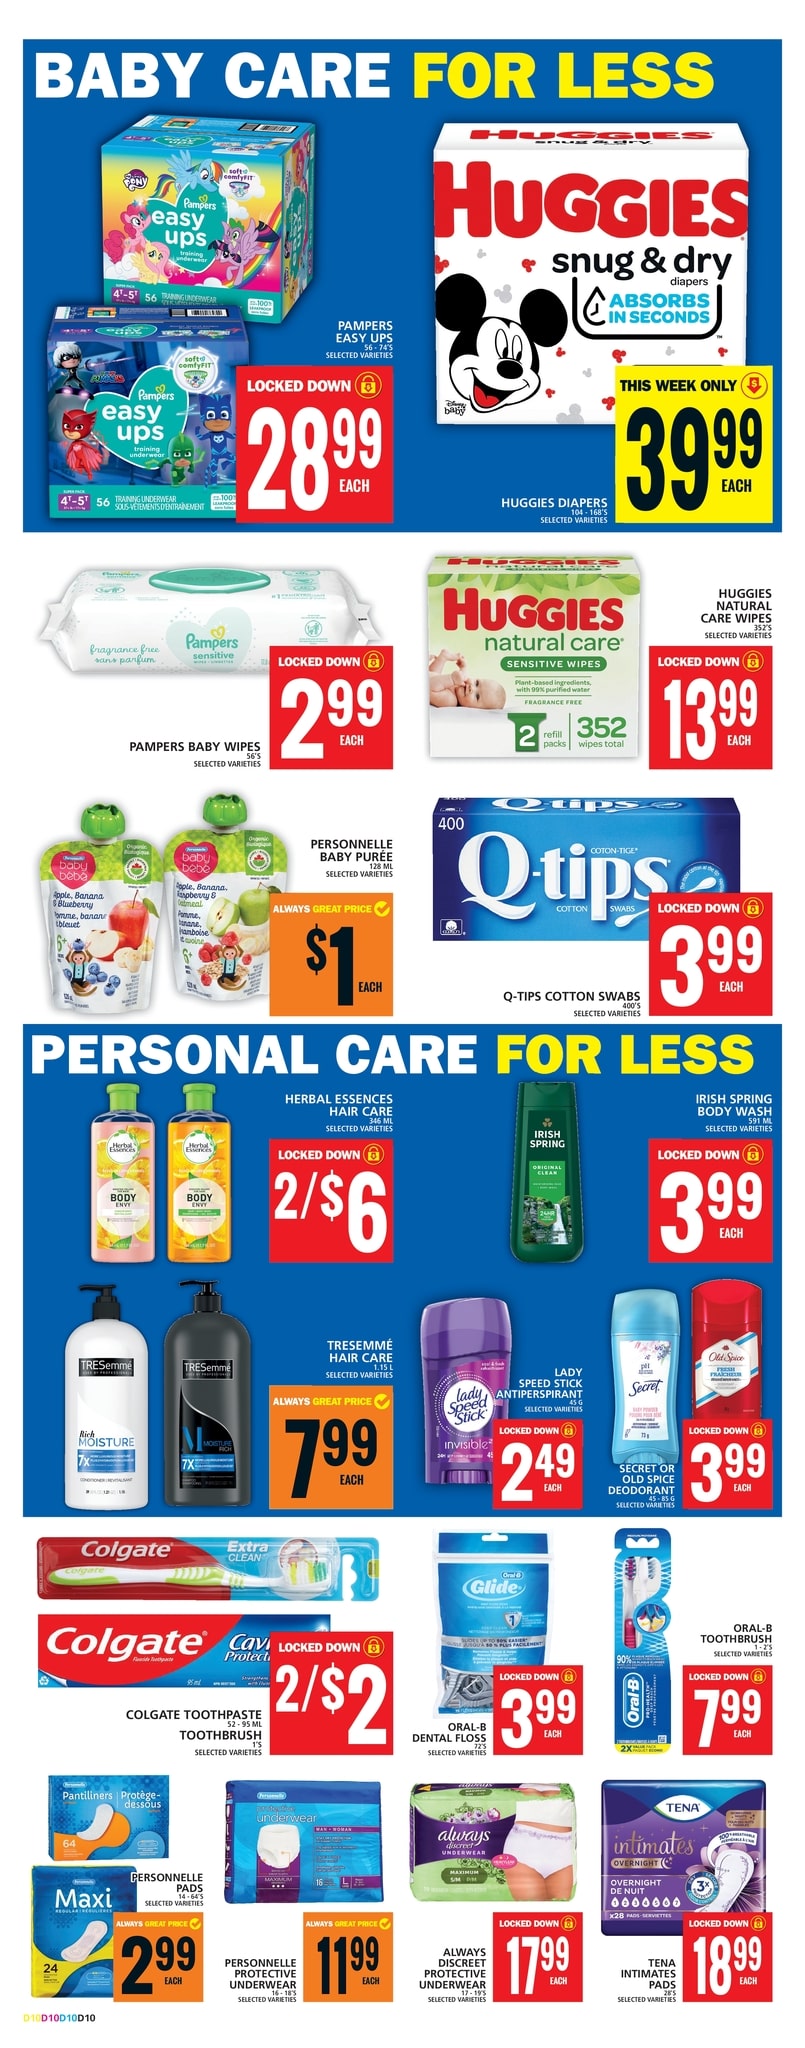 Food Basics - Weekly Flyer Specials - Page 12